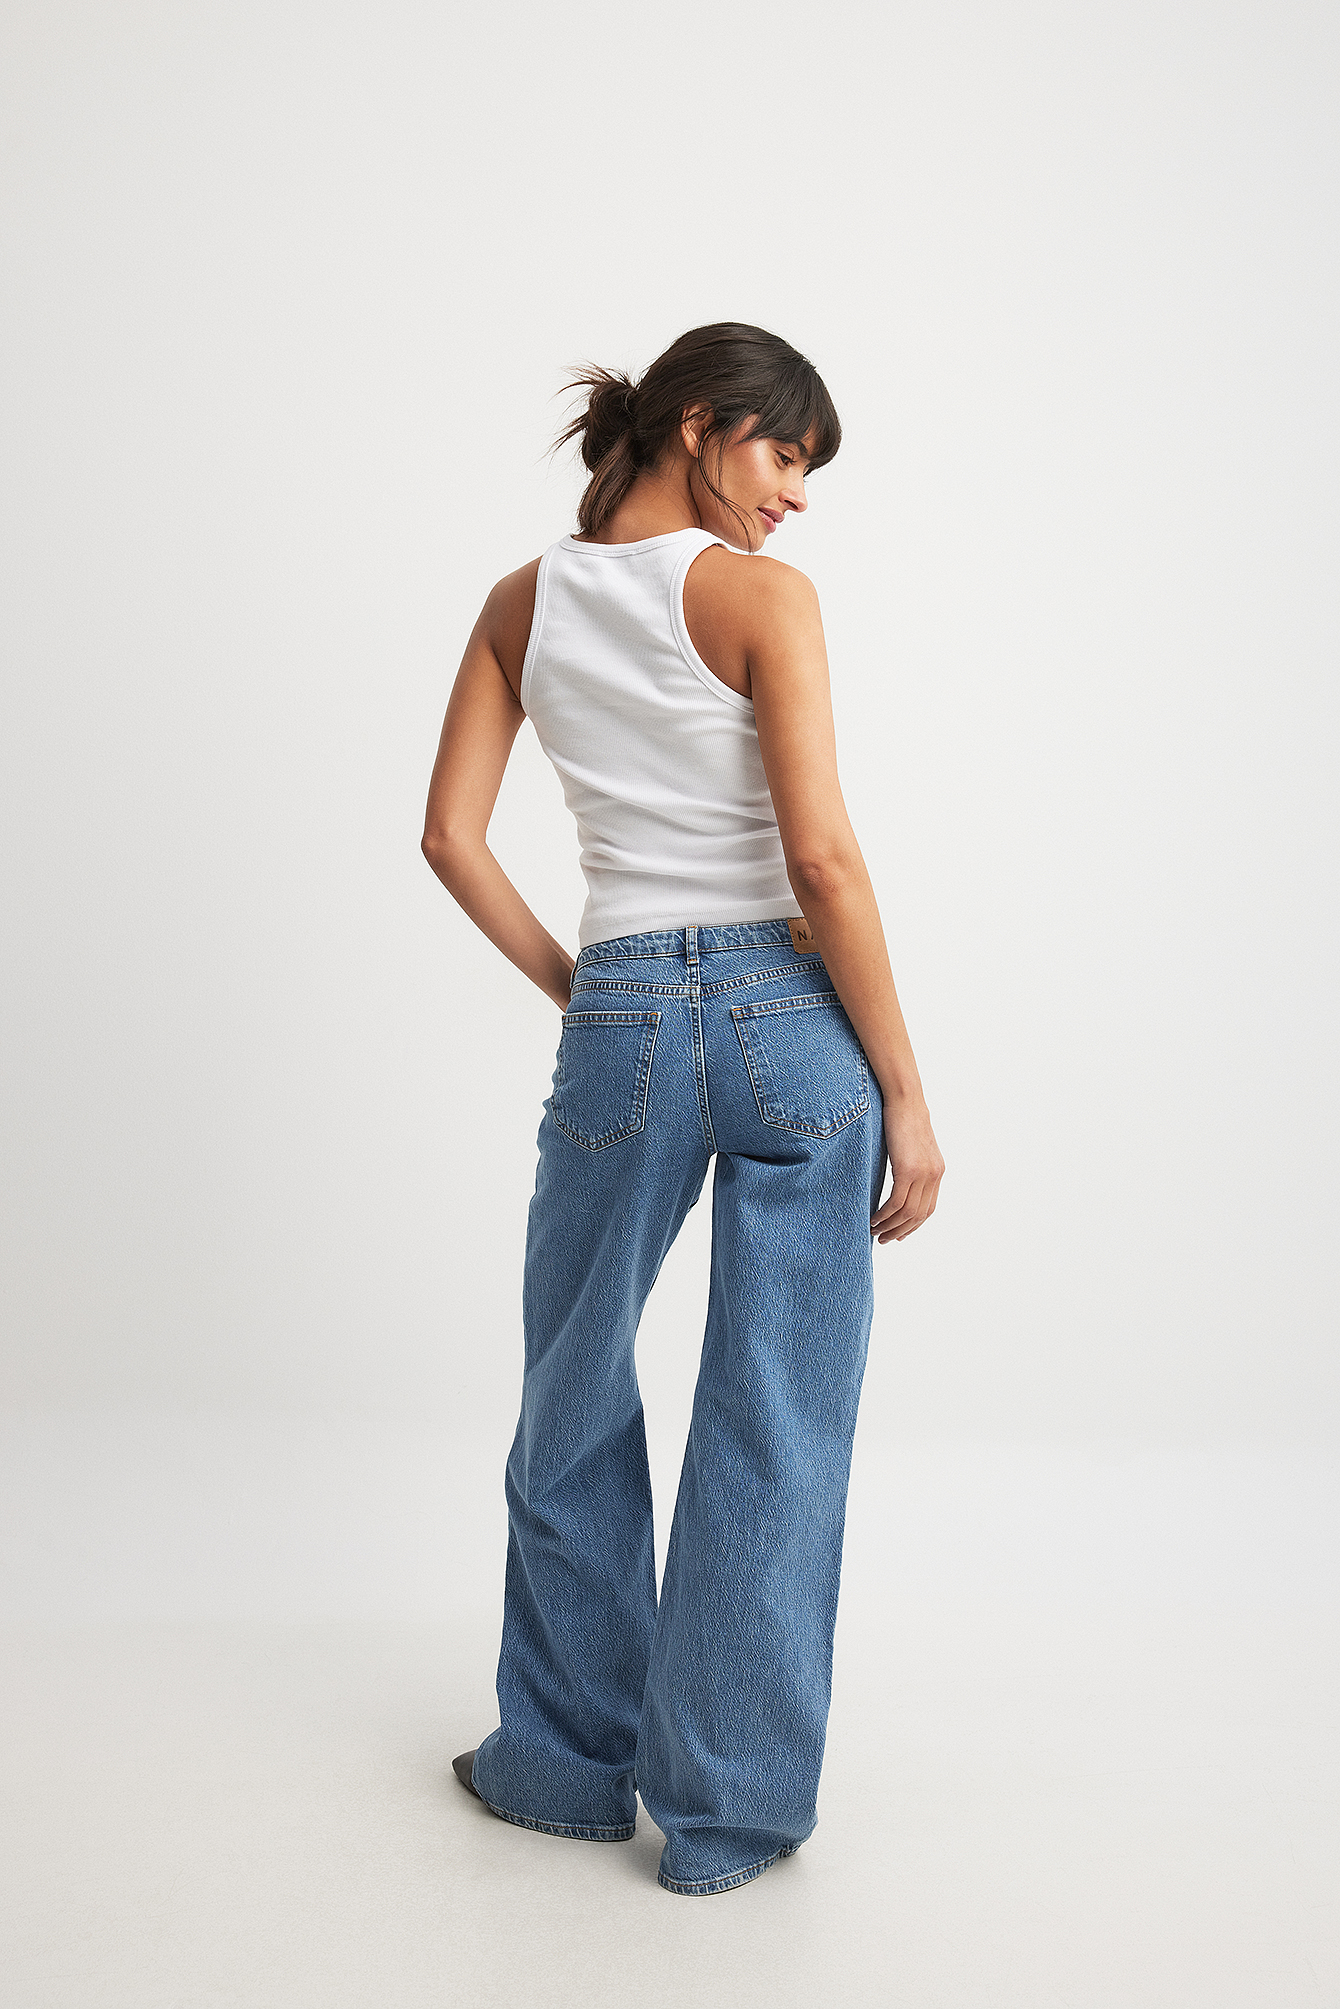 Discover more than 148 denim 80s fashion latest